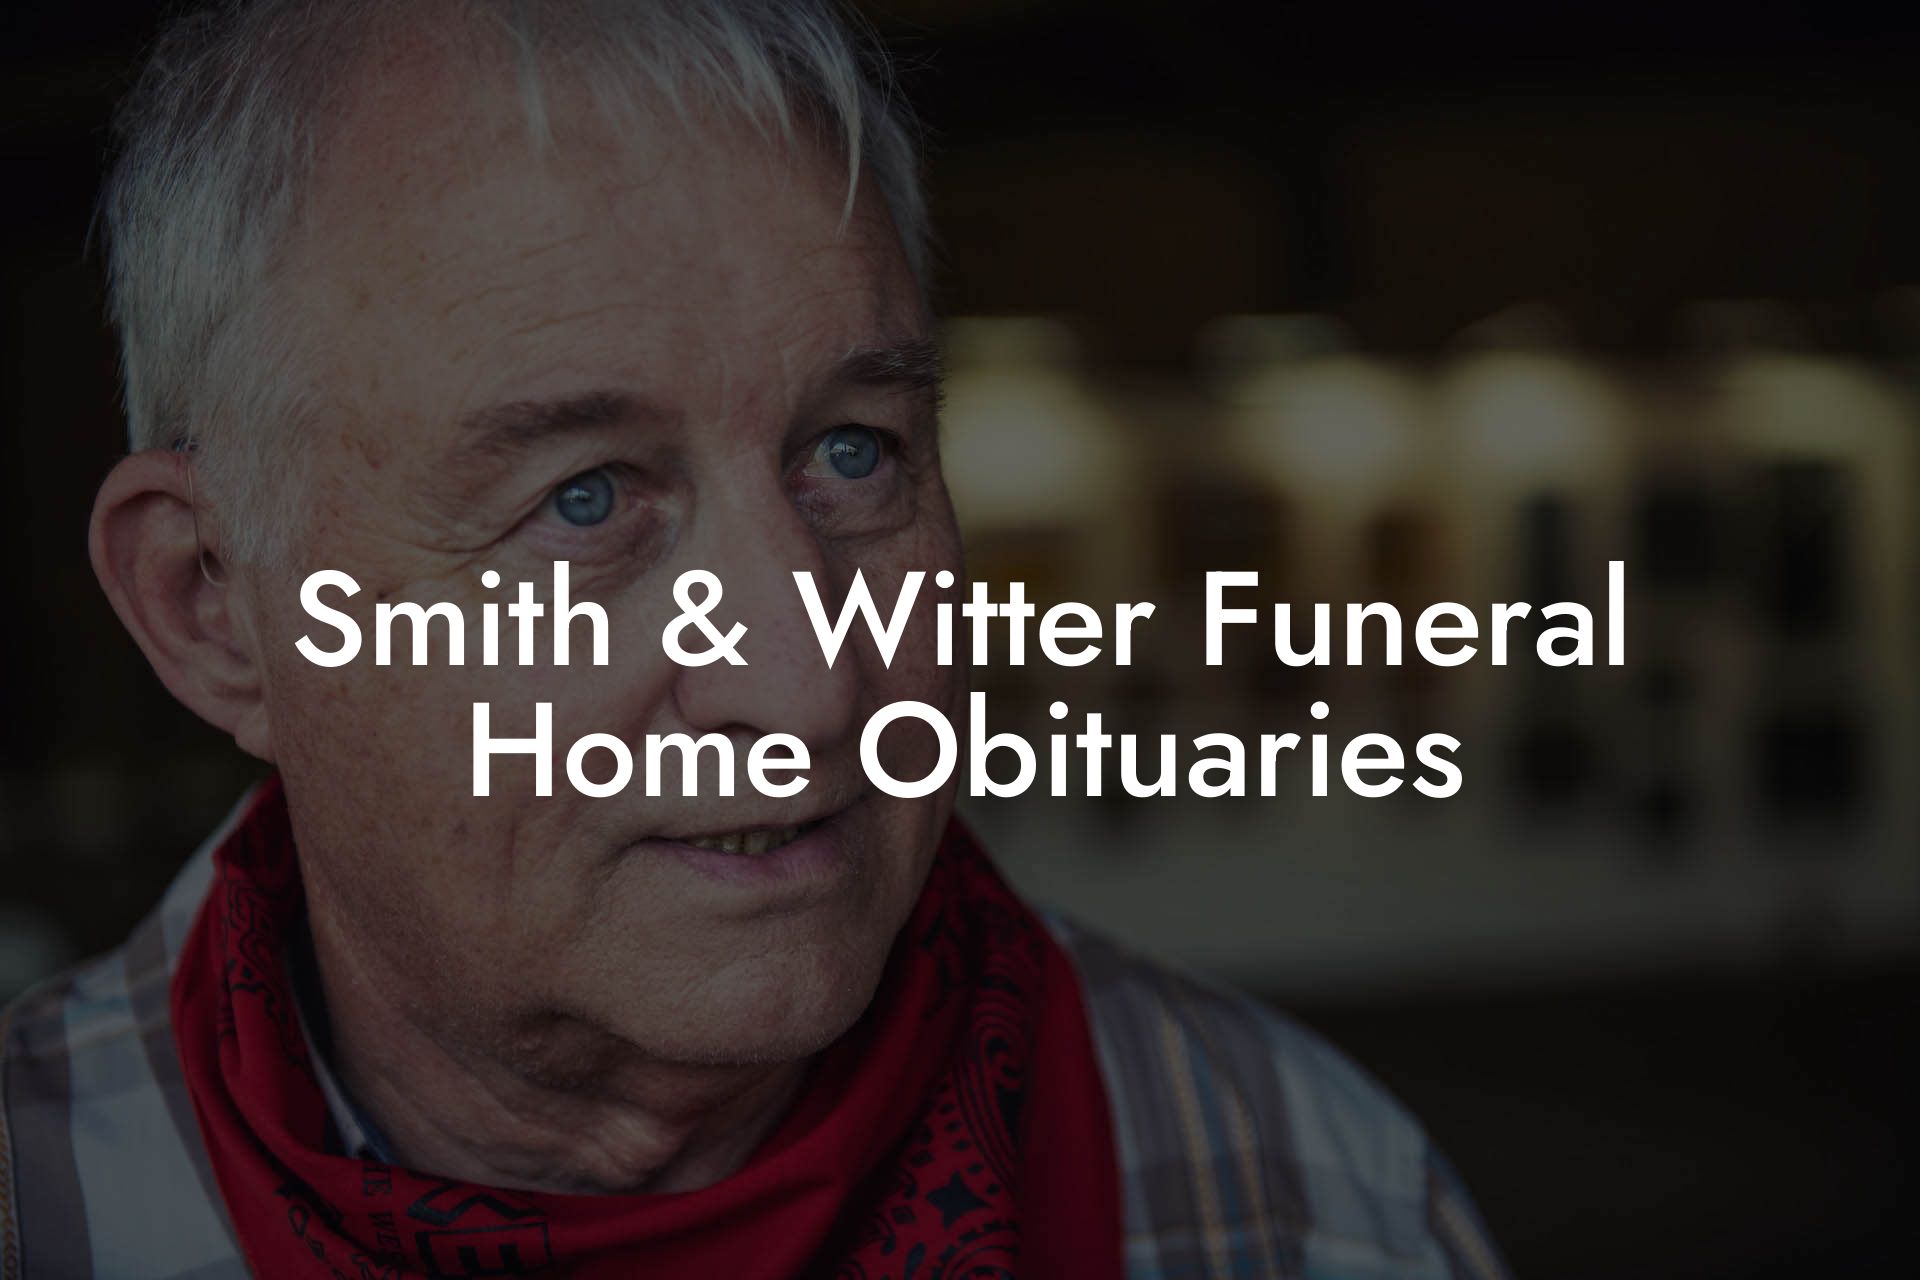 Smith & Witter Funeral Home Obituaries